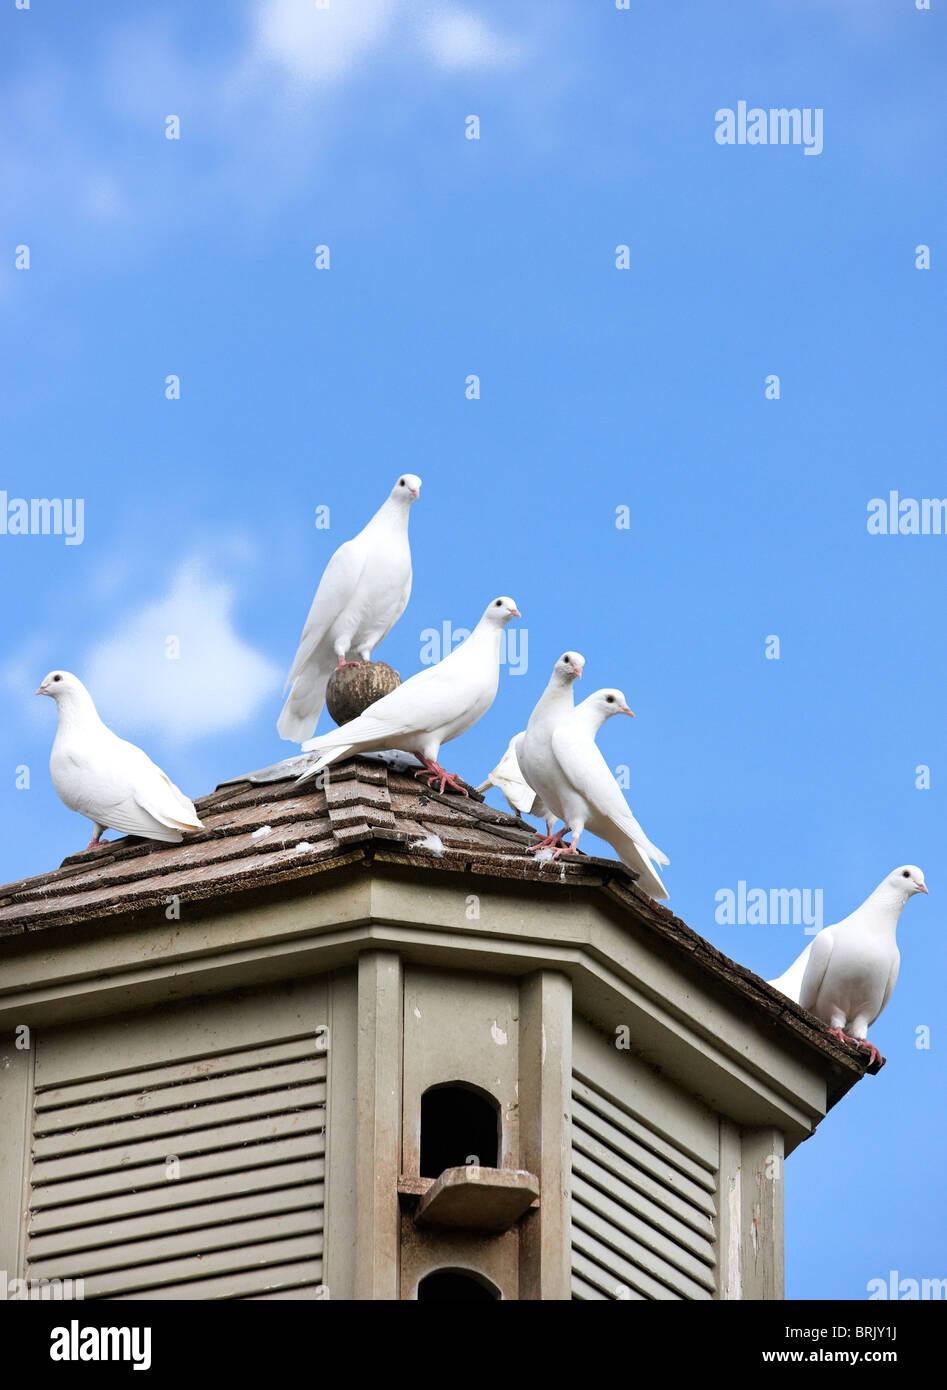 Doves on dovecote roof Stock Photo